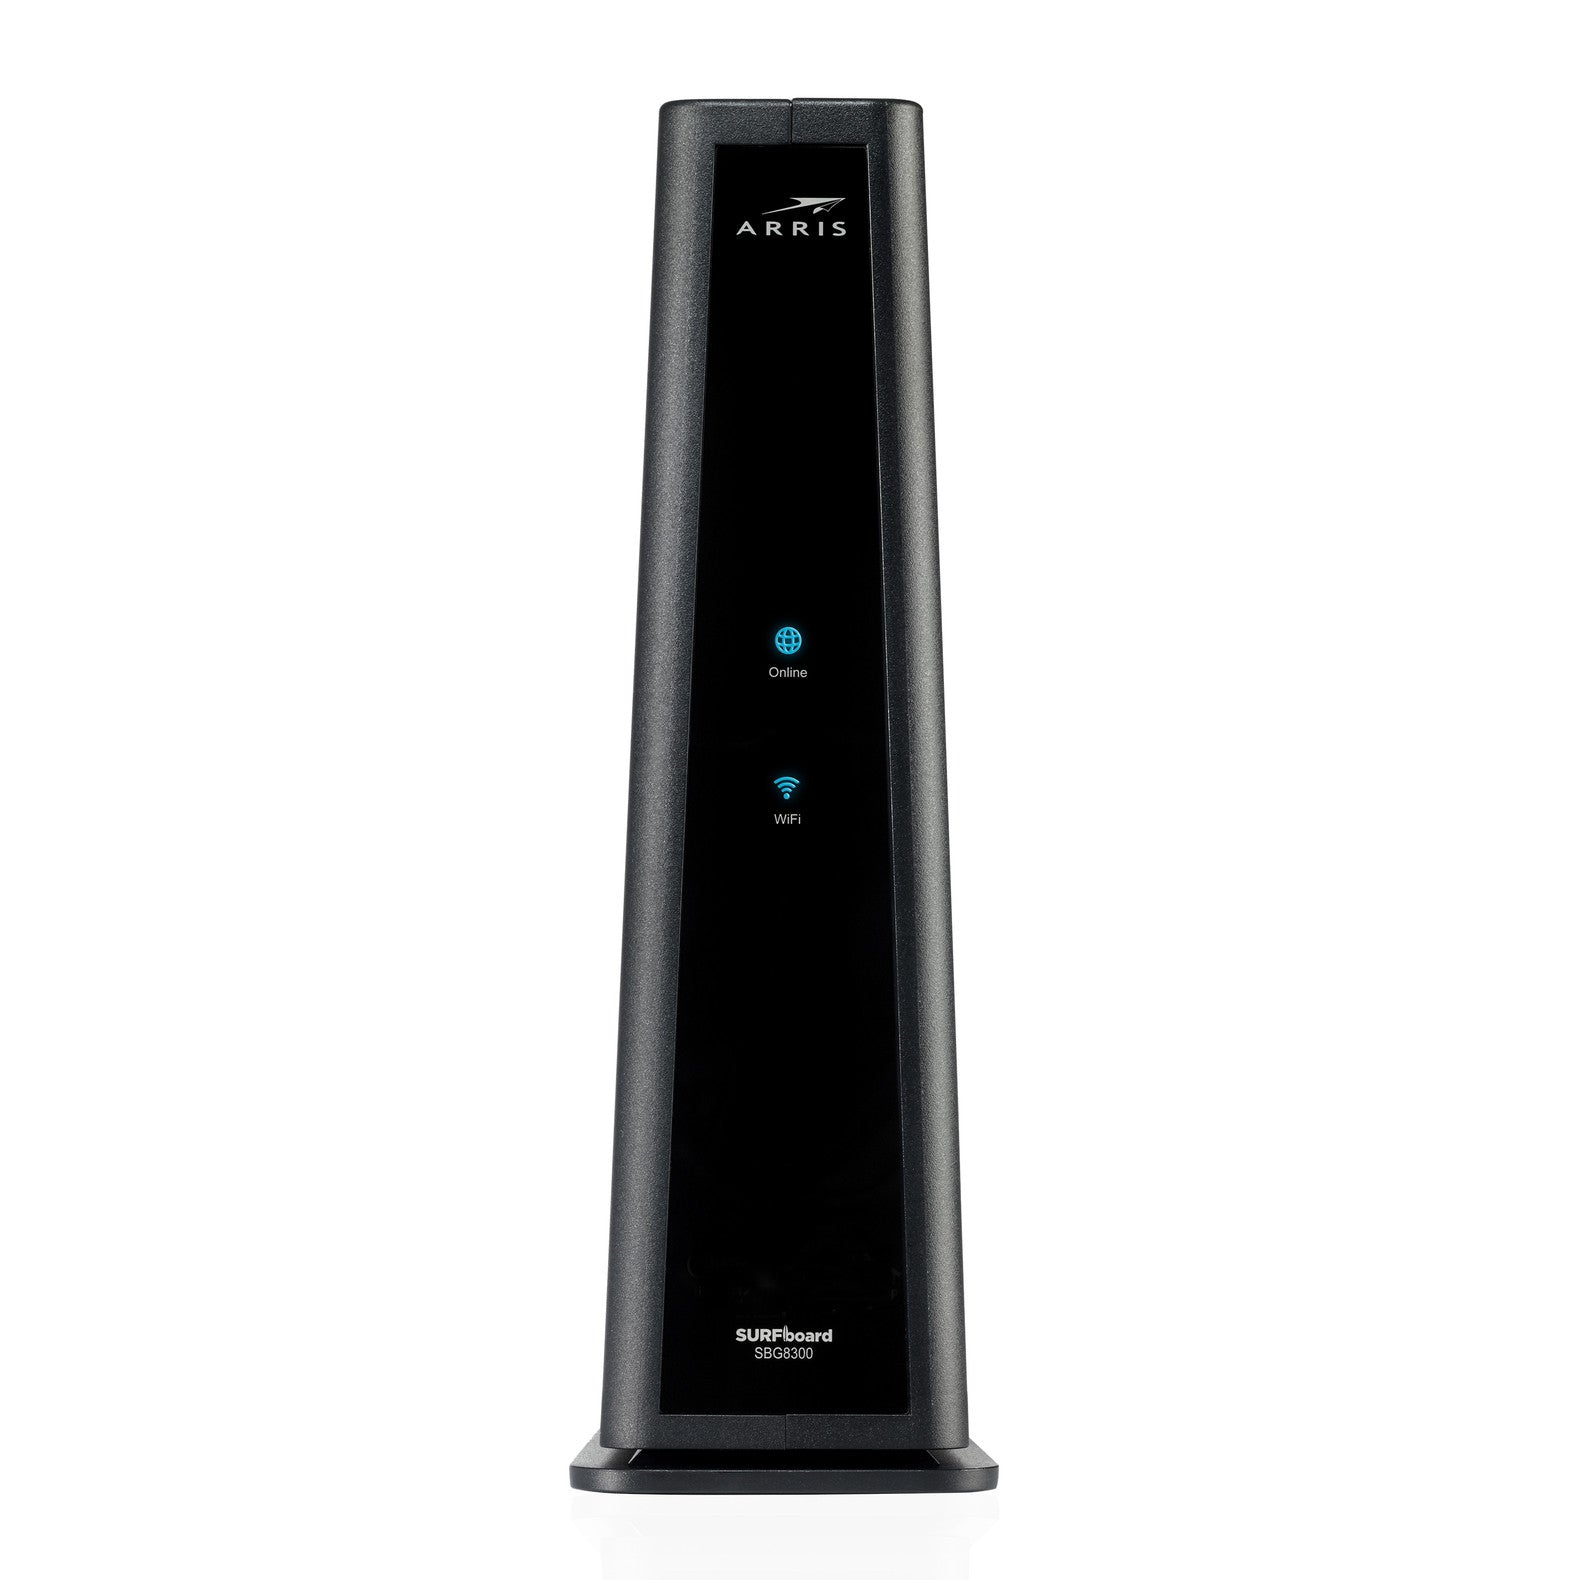 Arris SBG8300-RB Surfboard DOCSIS 3.1 Gigabit Cable Modem & AC2350 Wi-Fi Router - Certified Refurbished